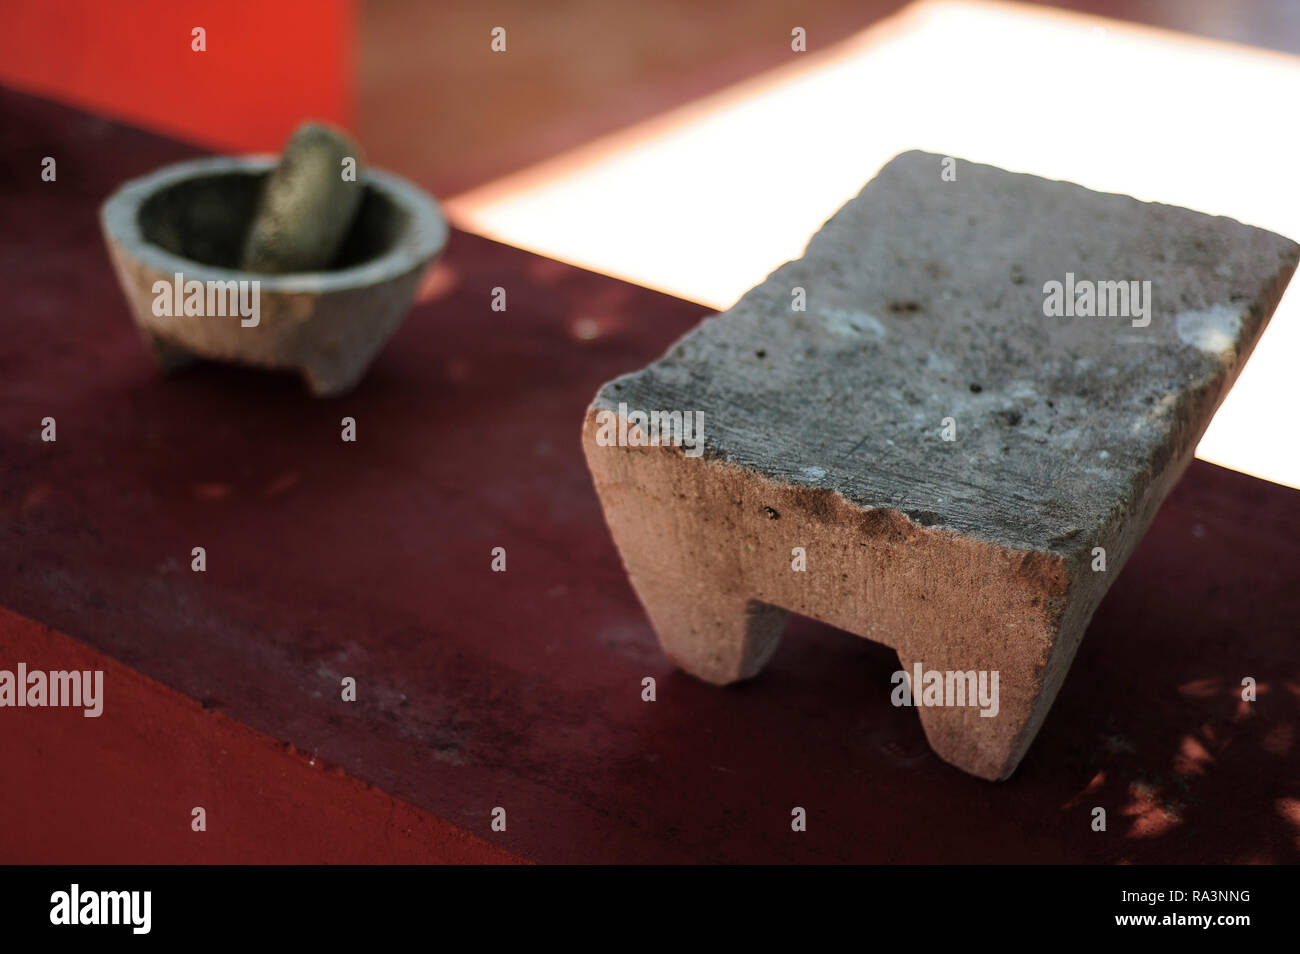 MERIDA, YUC/MEXICO - NOV 13, 2017:A molcajete (stone mortar used to grind condiments) with a temolote, and a rectangular one, used for decoration Stock Photo